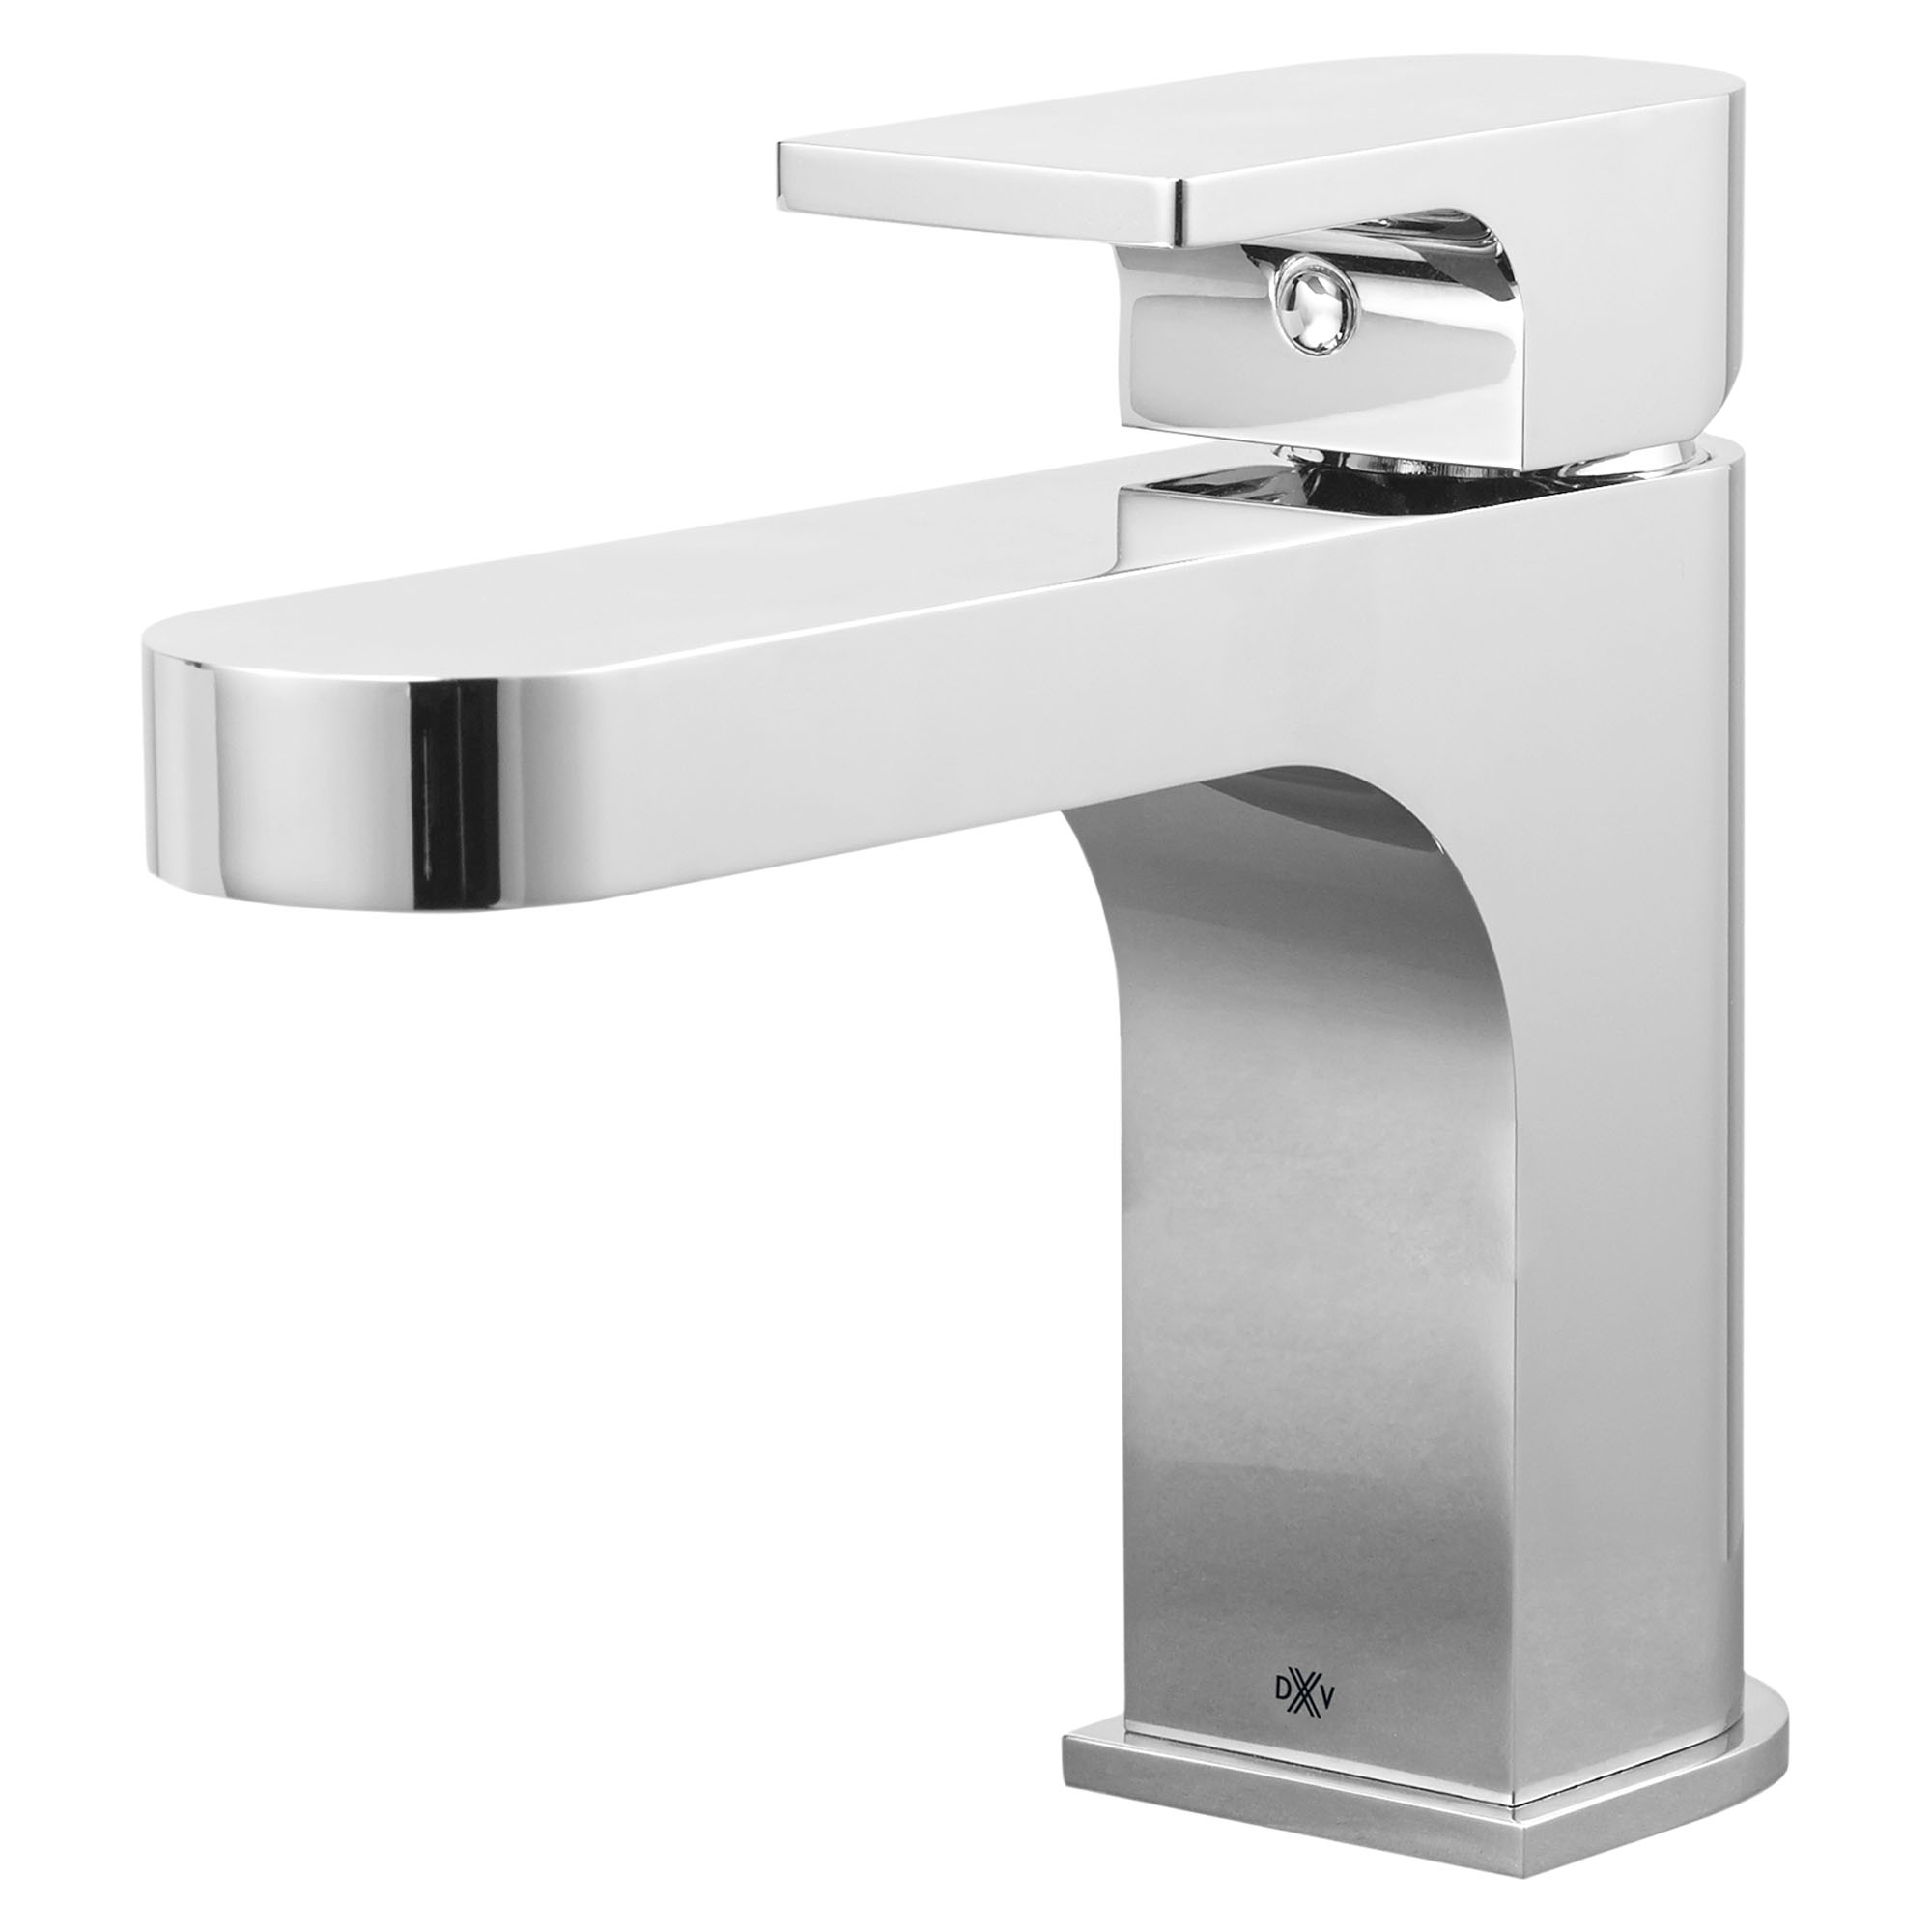 Equility Single Handle Bathroom Faucet with Lever Handle